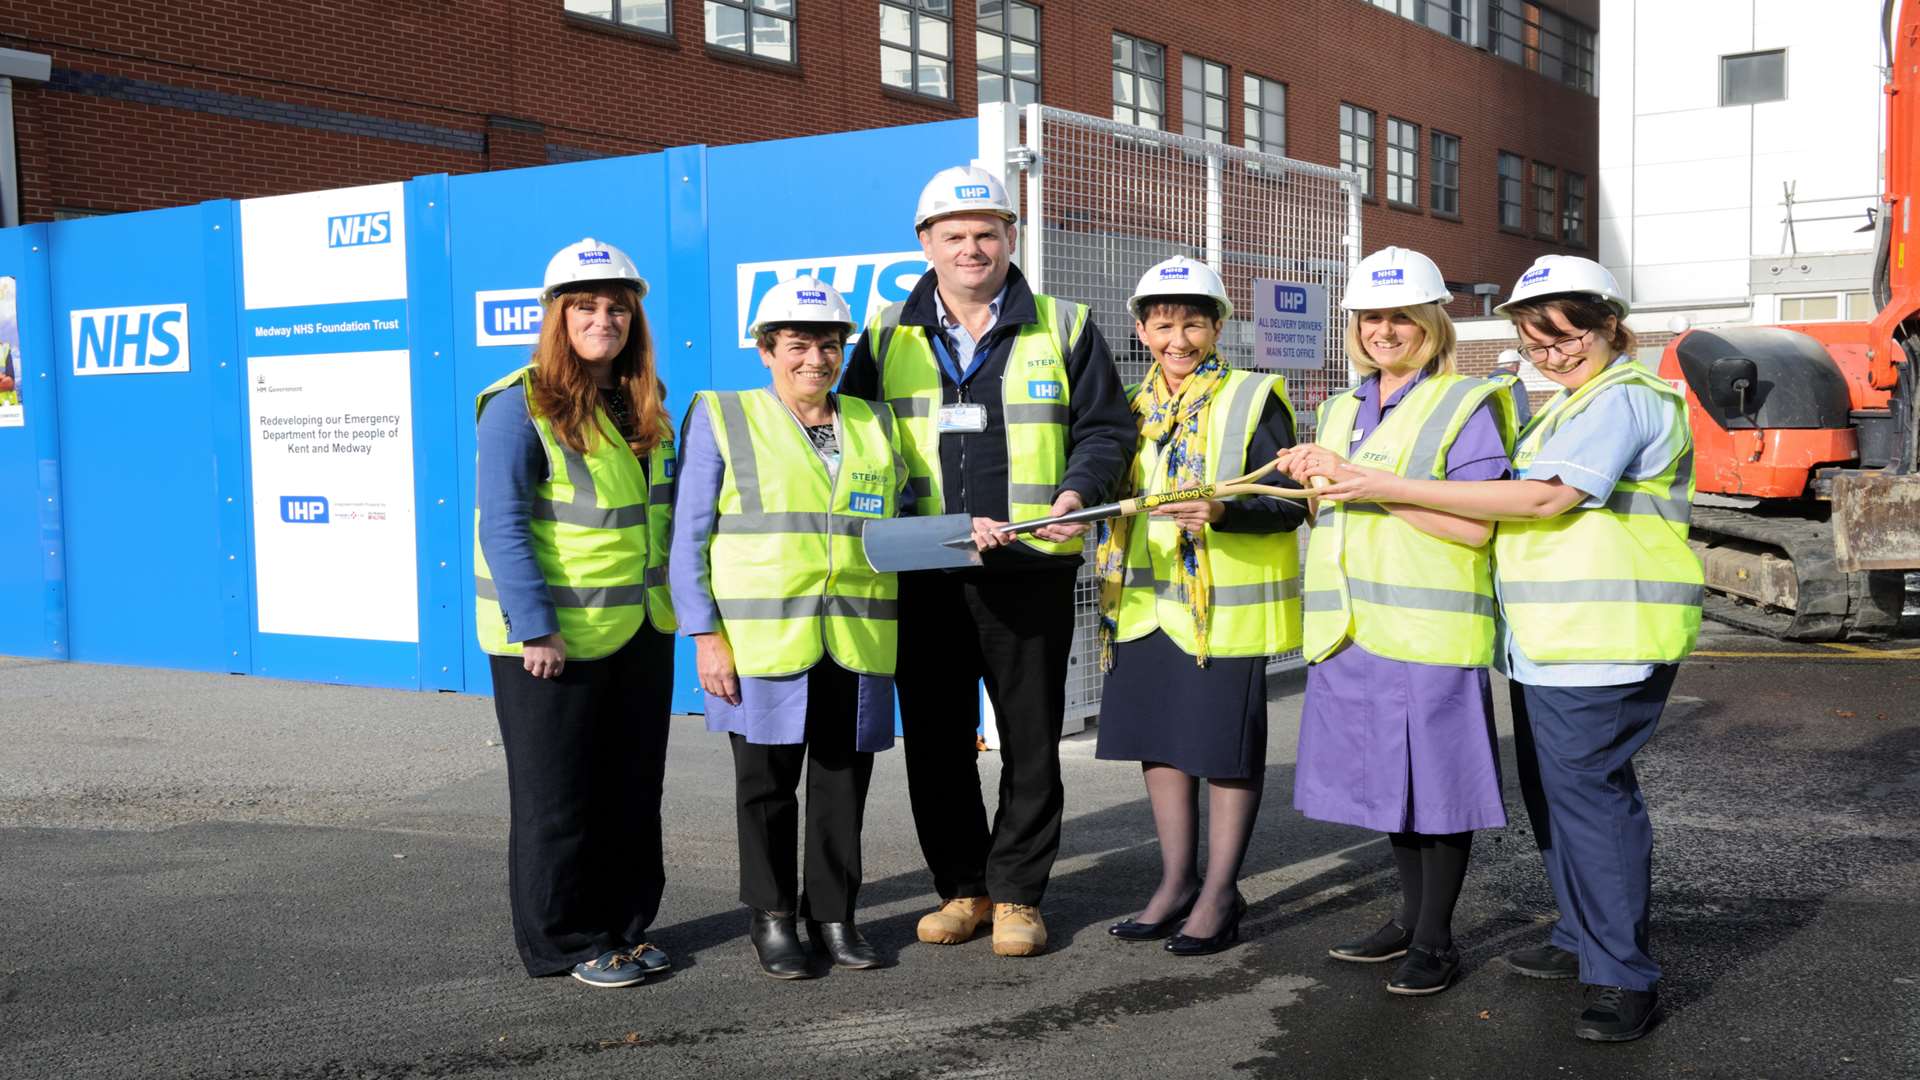 Work begins on the new major injuries emergency department at Medway Hospital